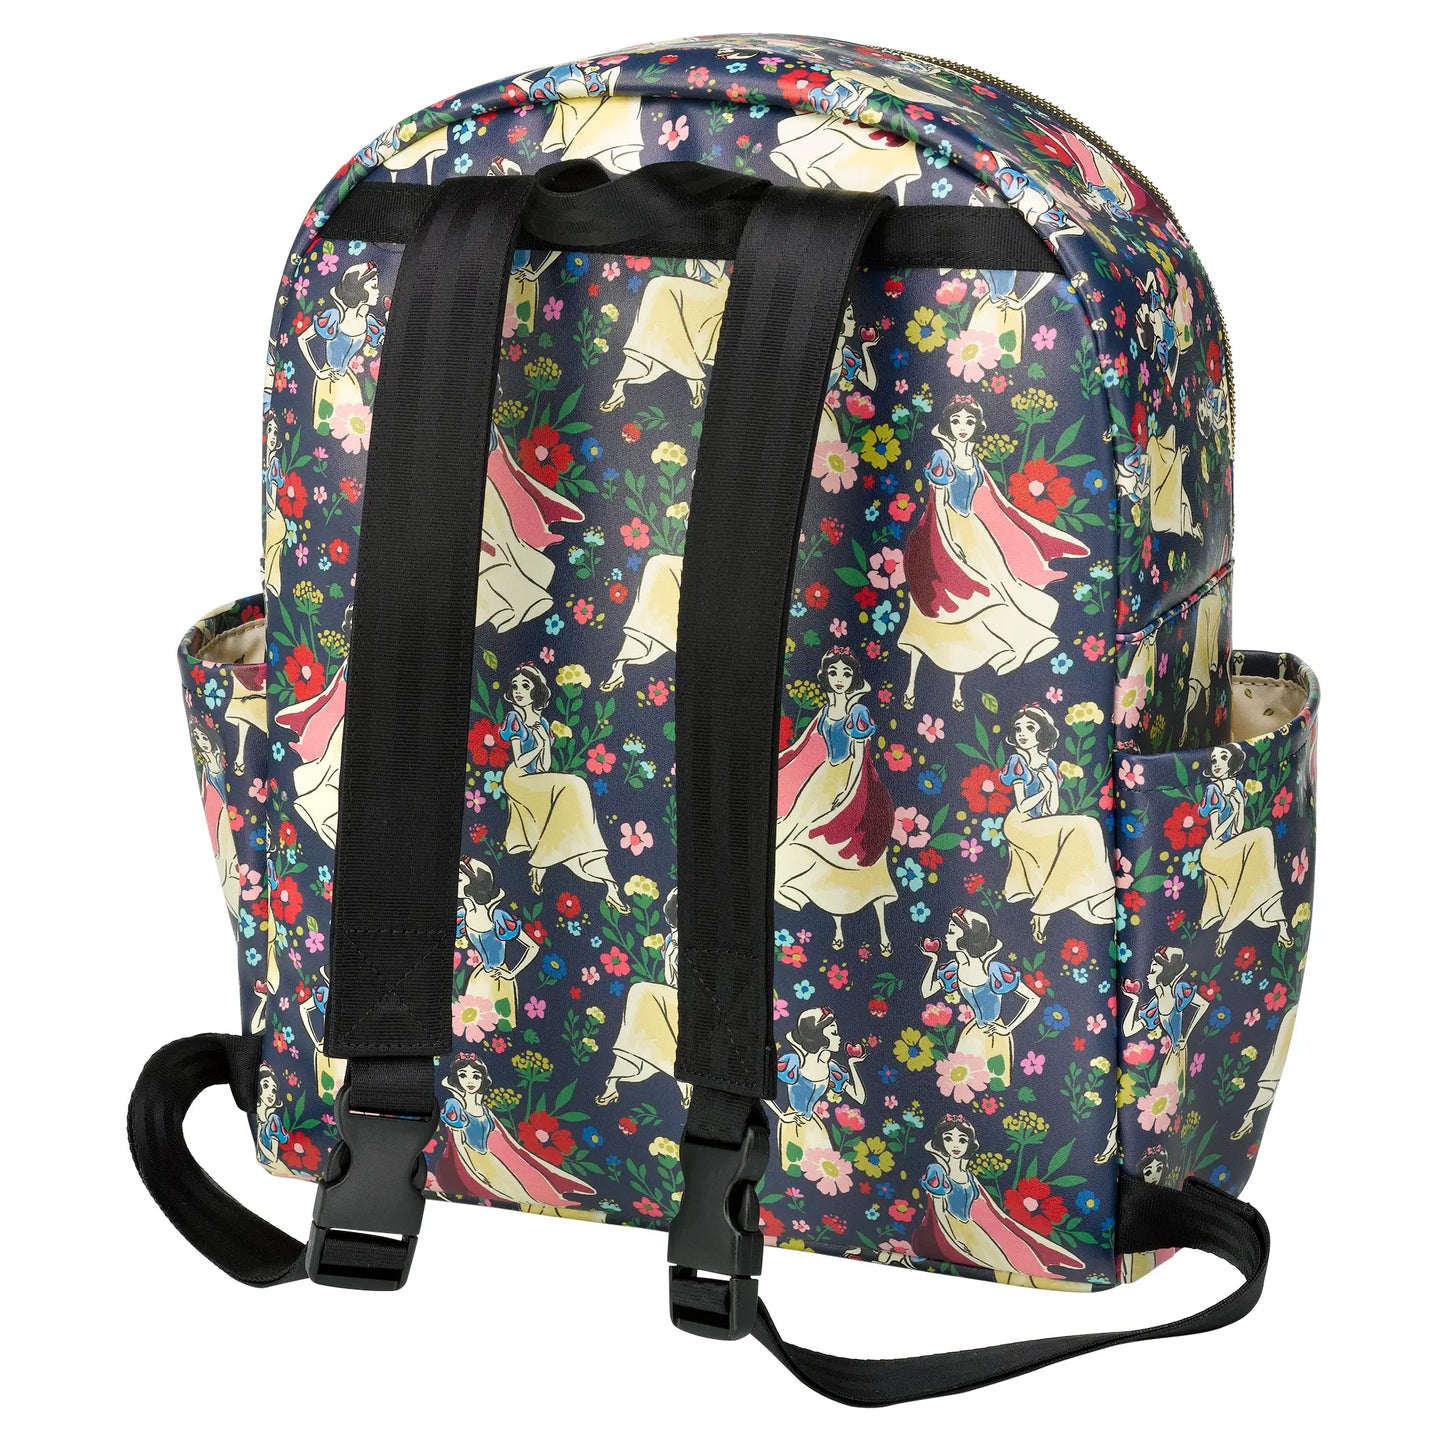 Petunia Pickle Bottom District Backpack Disney Snow White's Enchanted Forest Diaper Bag